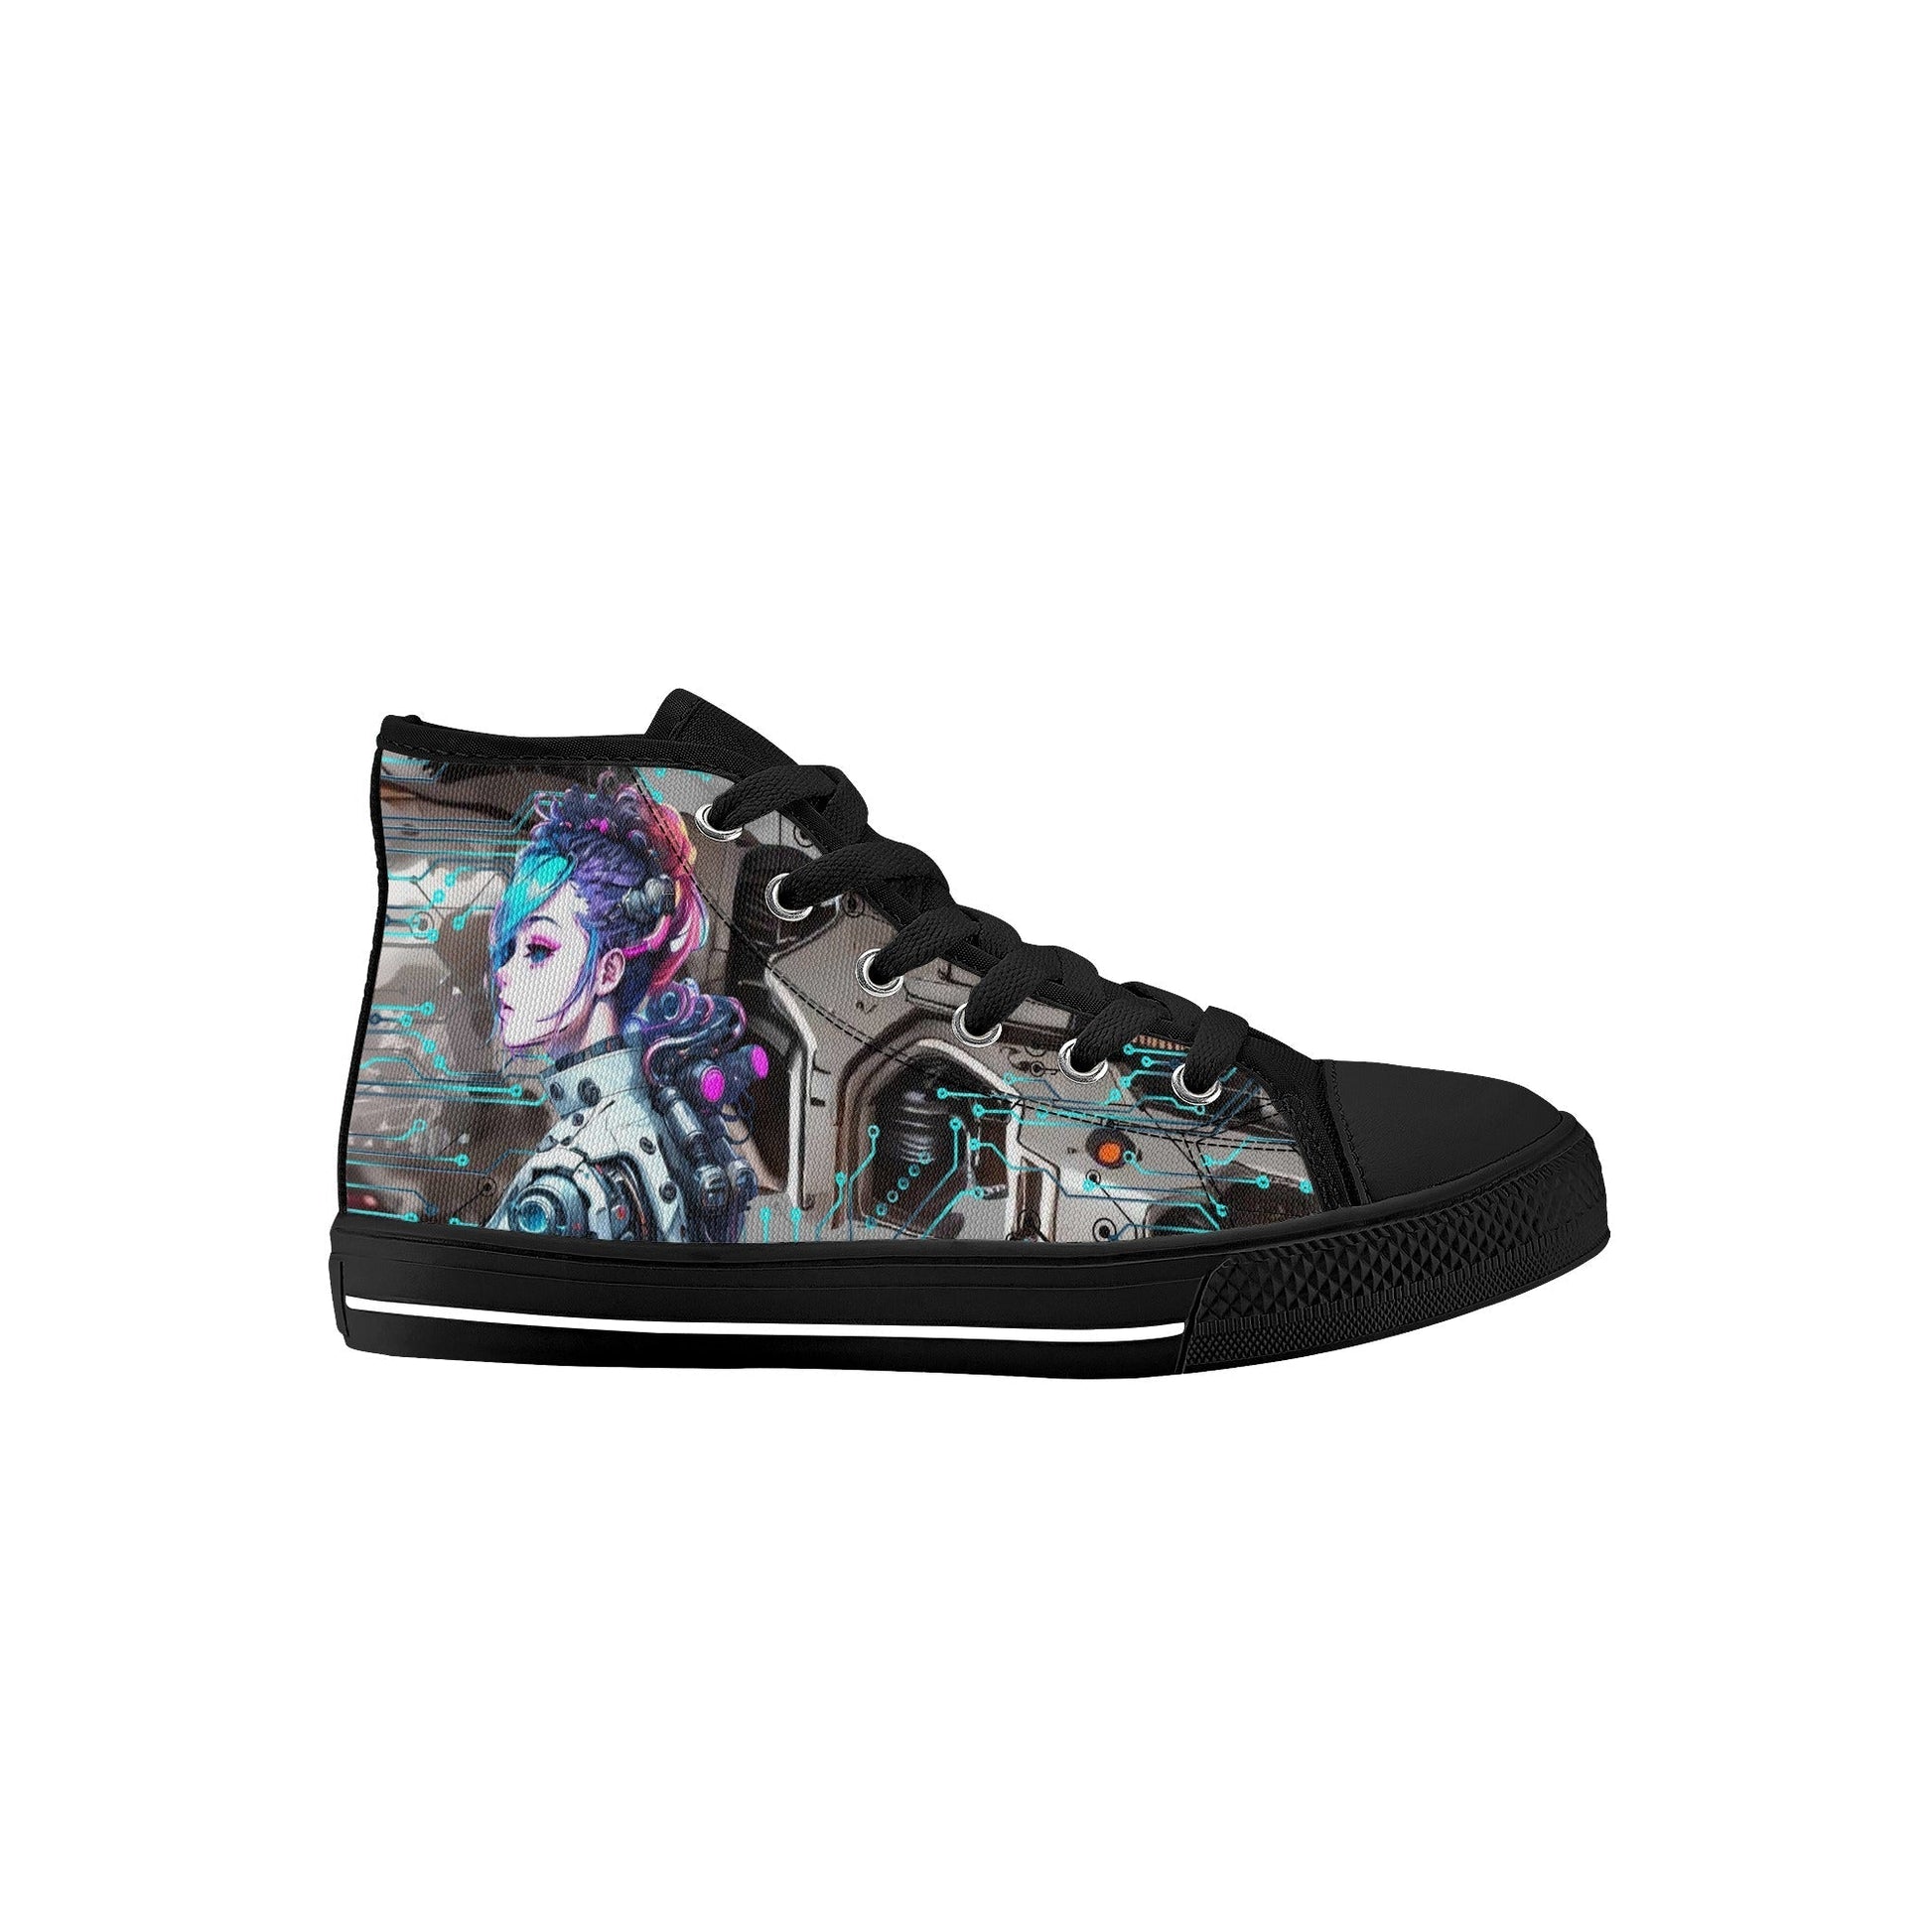 Stand out  with the  Cyber Freak Kids High Top Canvas Shoes  available at Hey Nugget. Grab yours today!